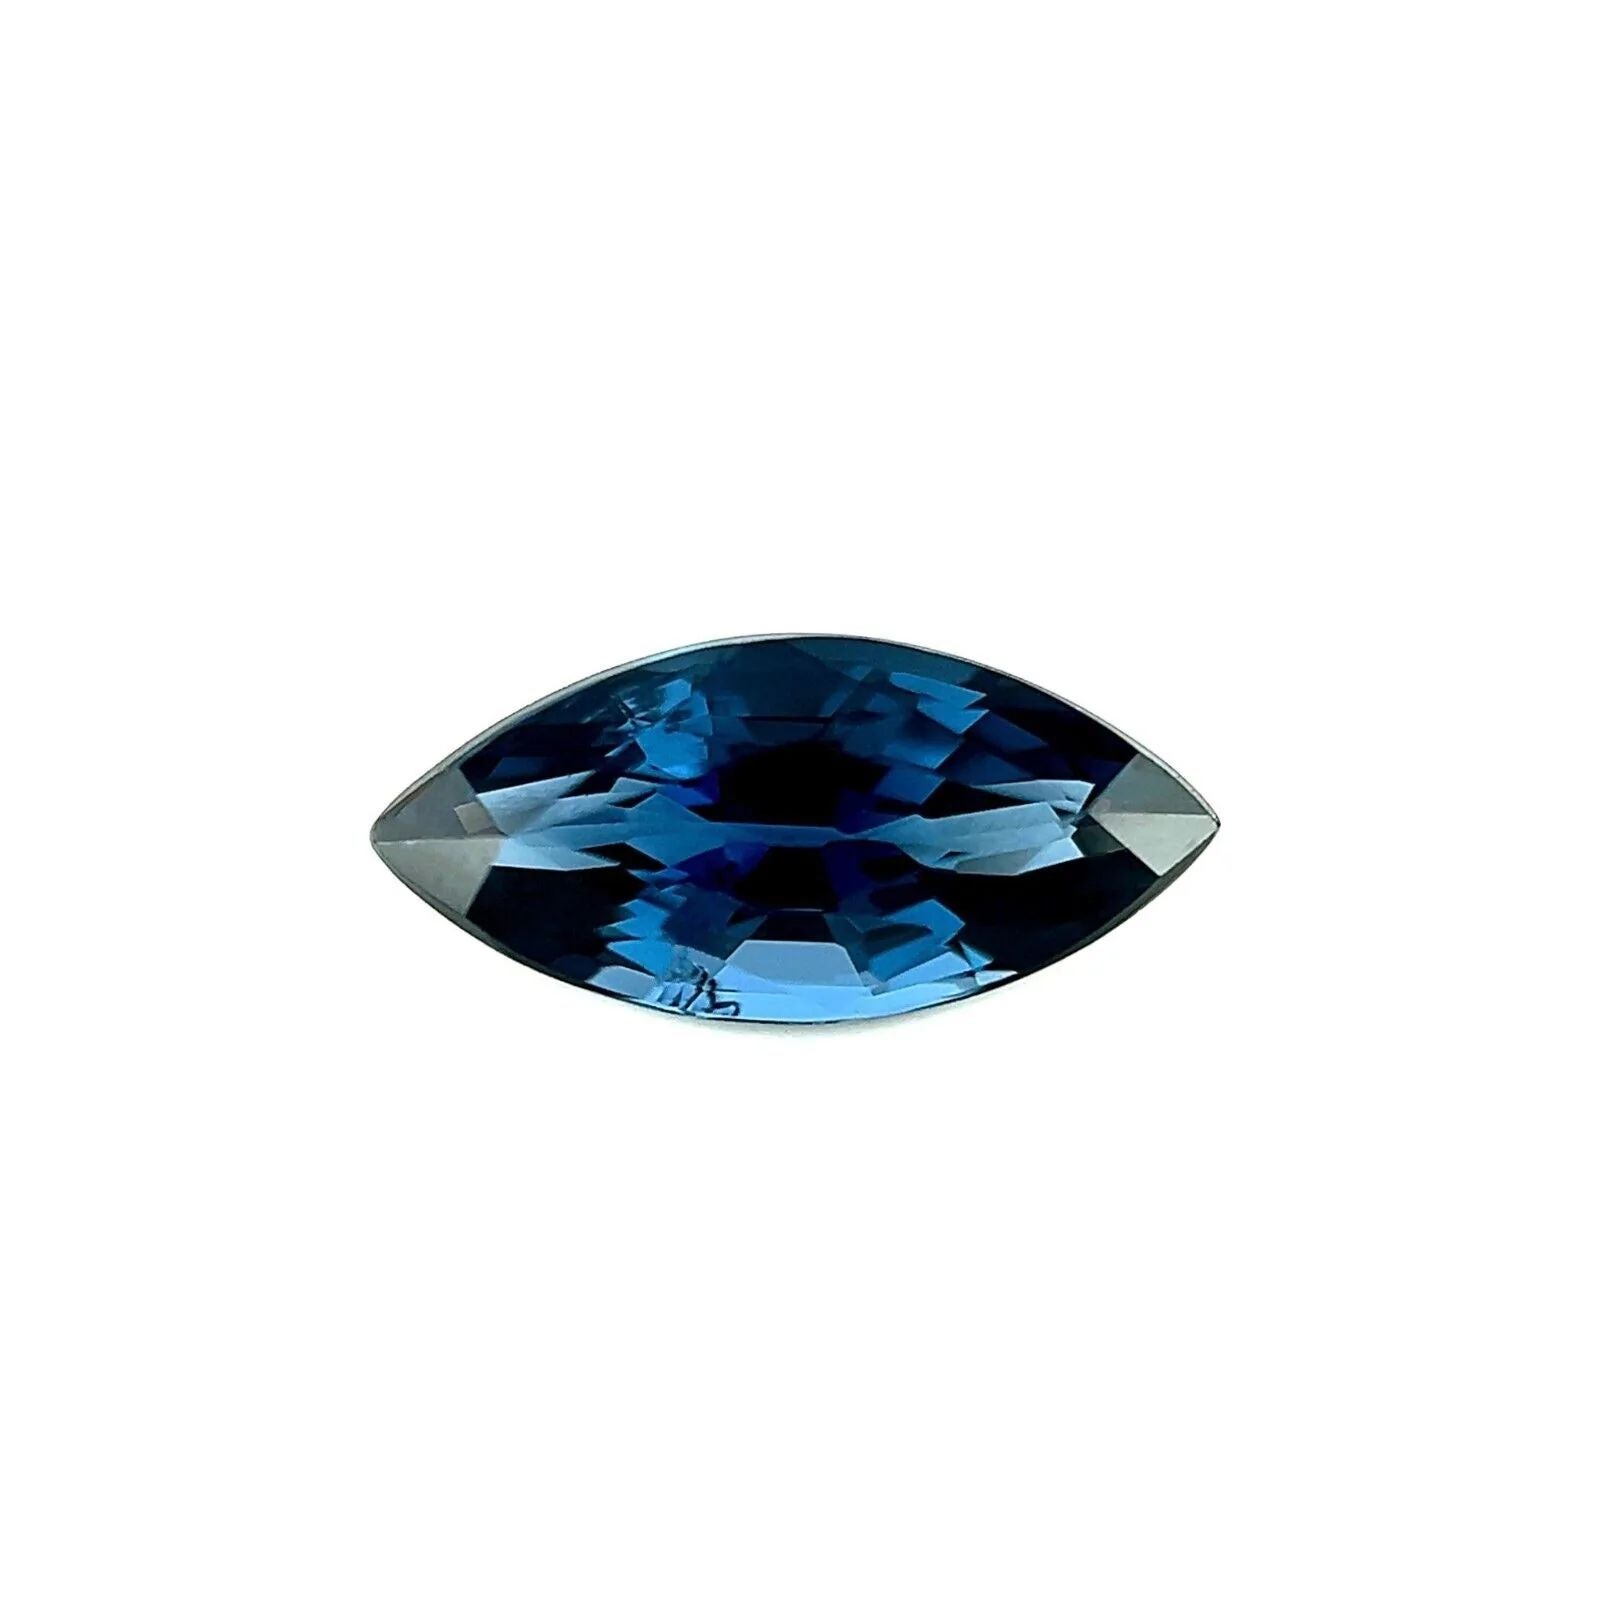 1.05ct Fine Blue Spinel Marquise Cut Rare Gemstone 9.6x4.4mm Loose Rare Gem For Sale